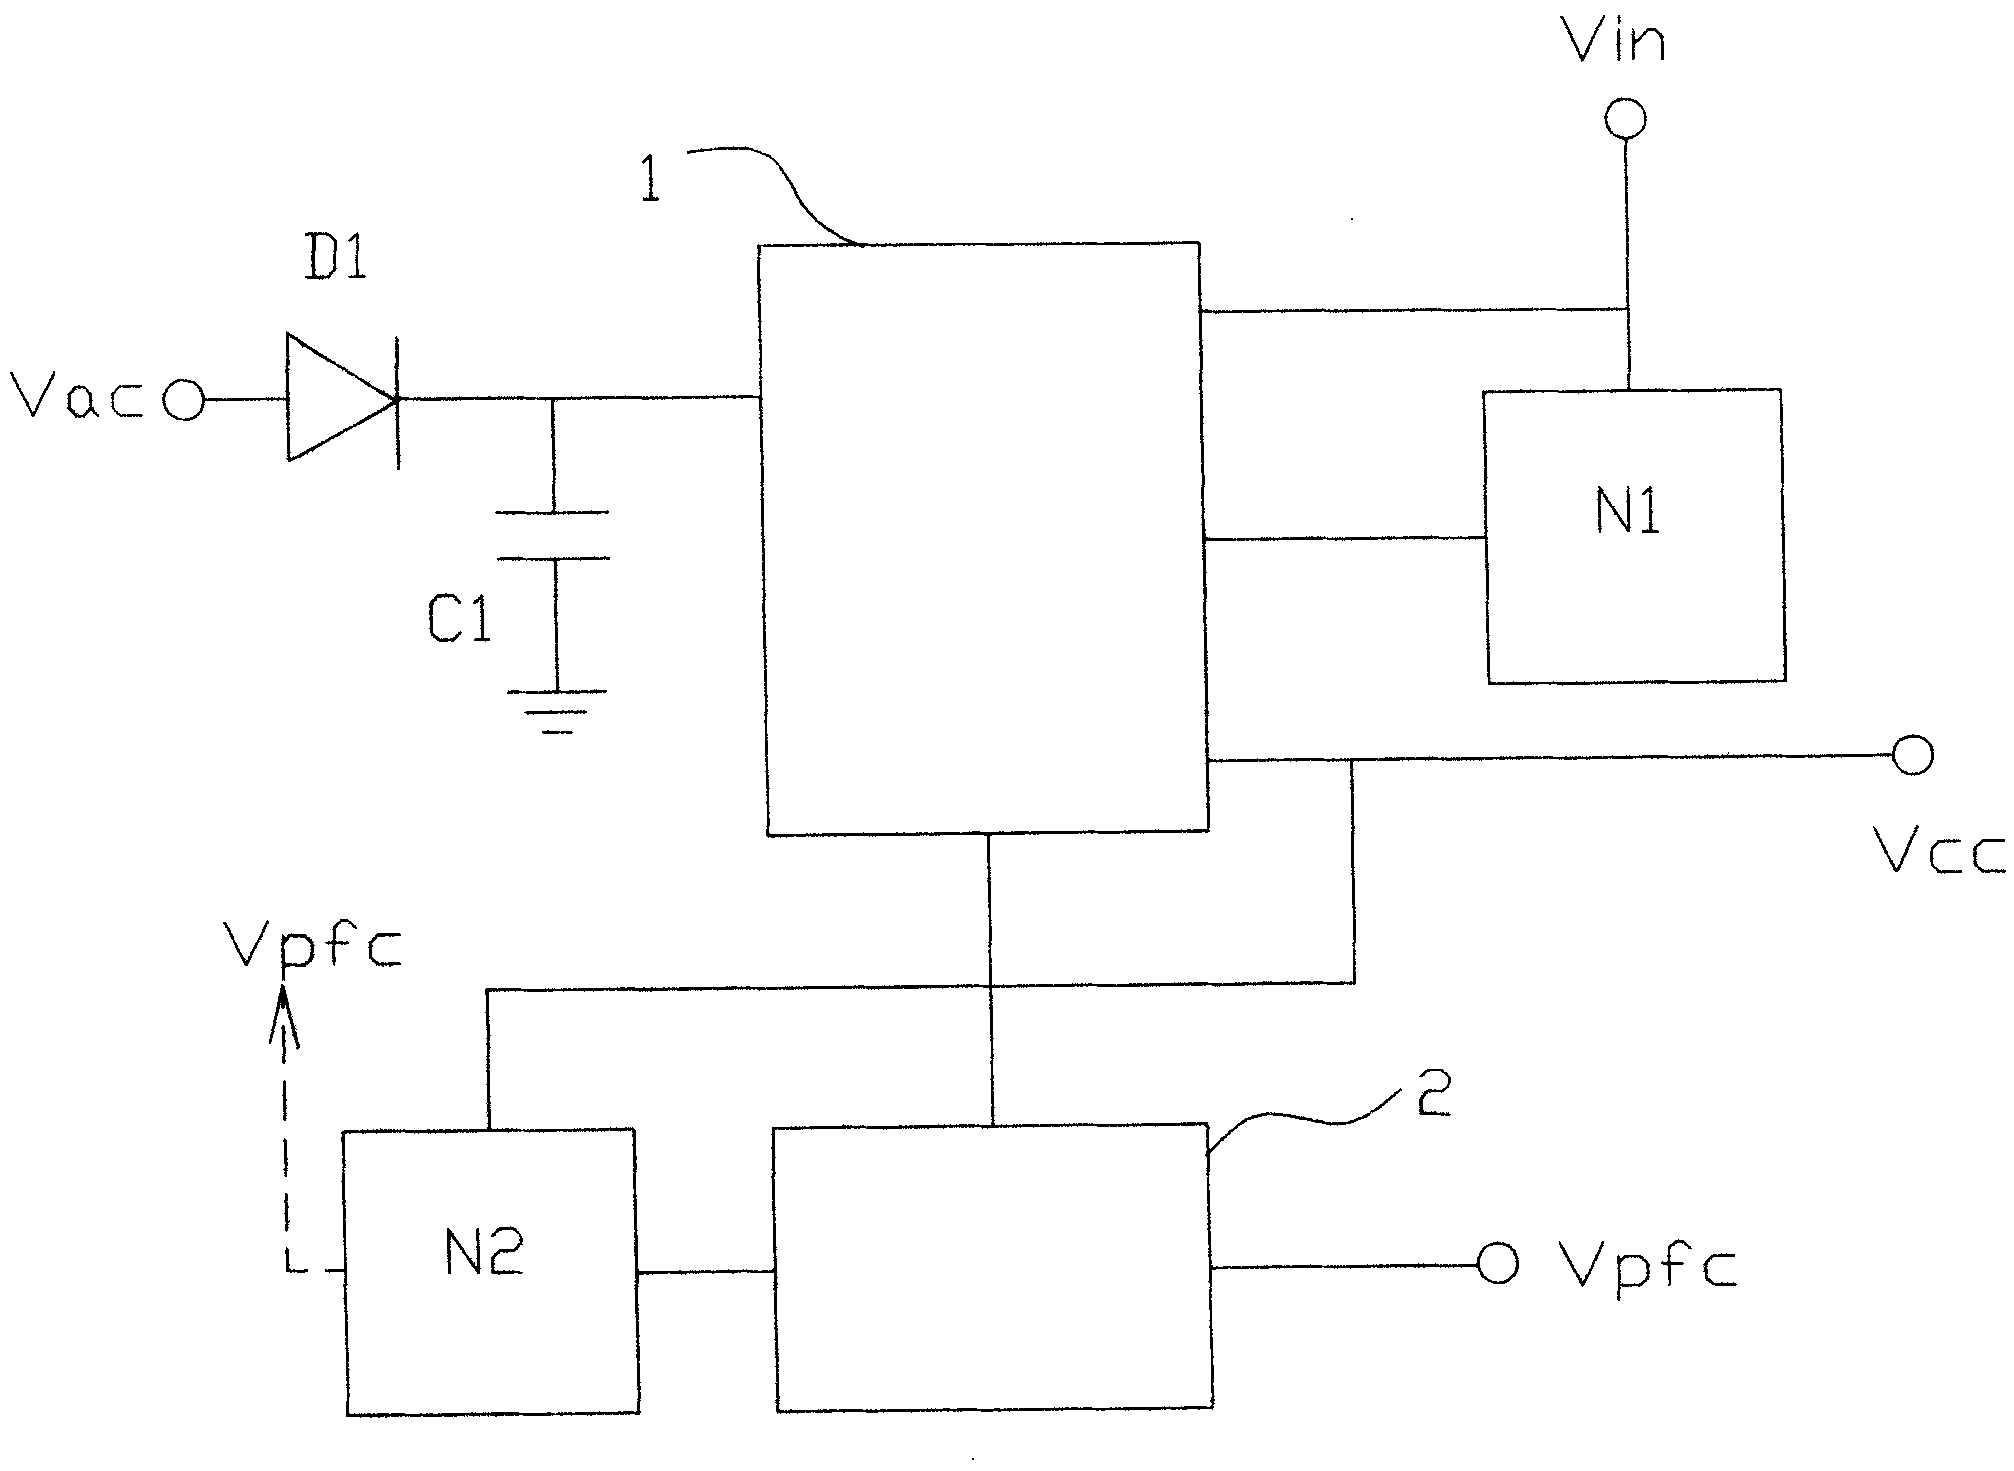 Television power supply protective circuit